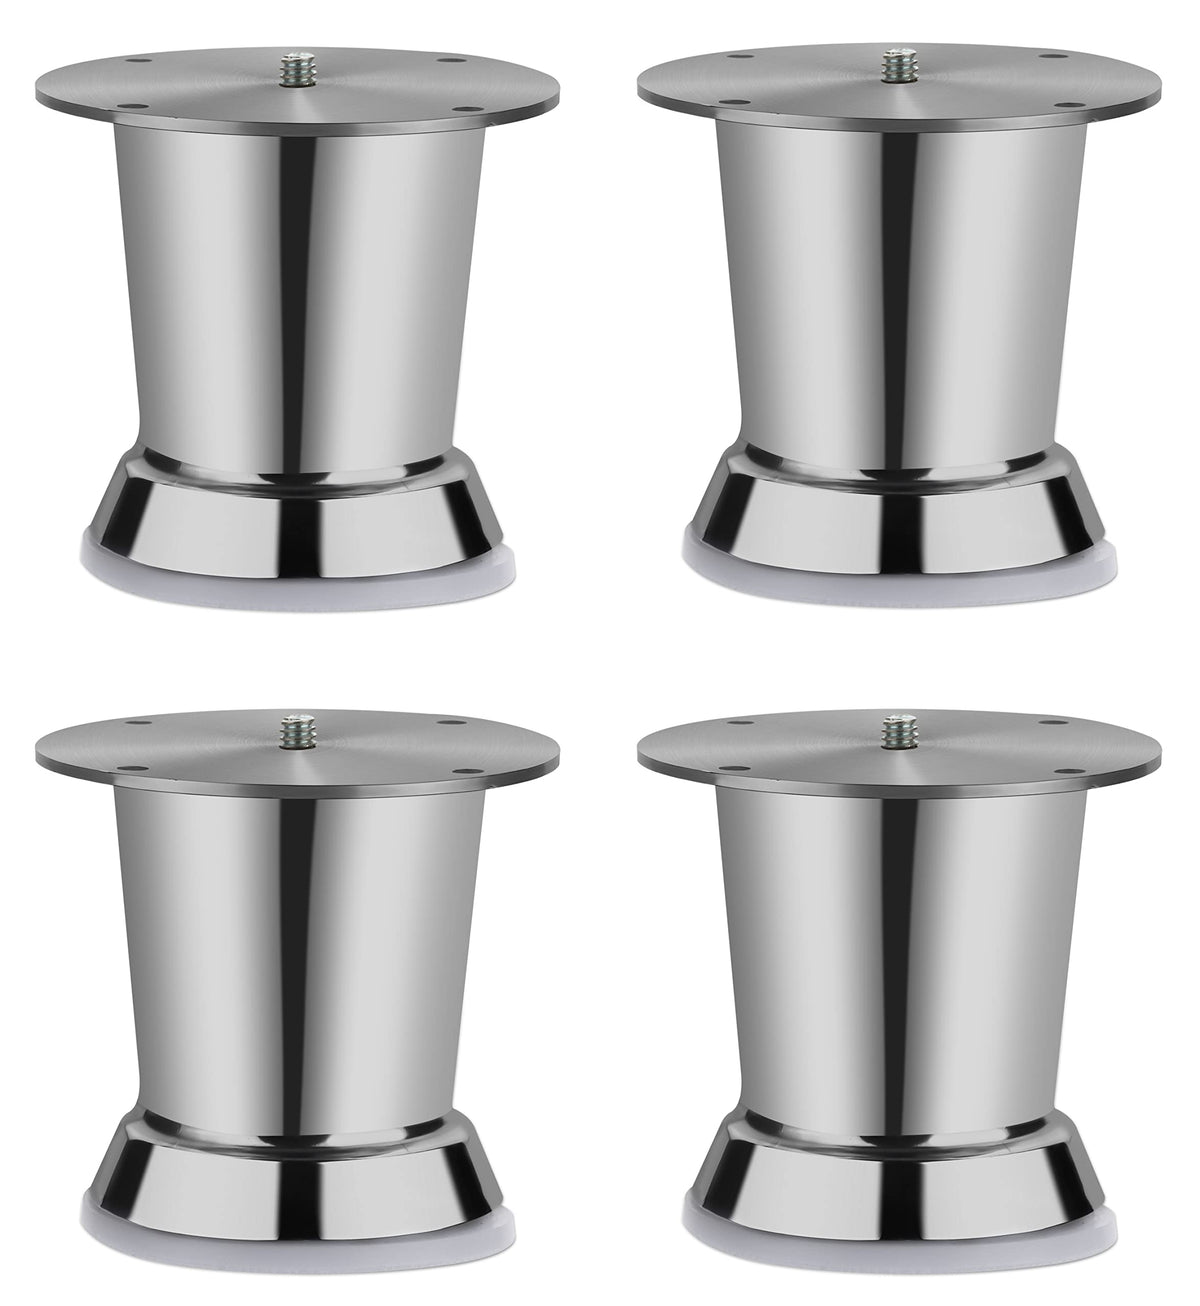 Plantex Heavy Duty Stainless Steel 3 inch Sofa Leg/Bed Furniture Leg Pair for Home Furnitures (DTS-51, Chrome) – Pack of 4